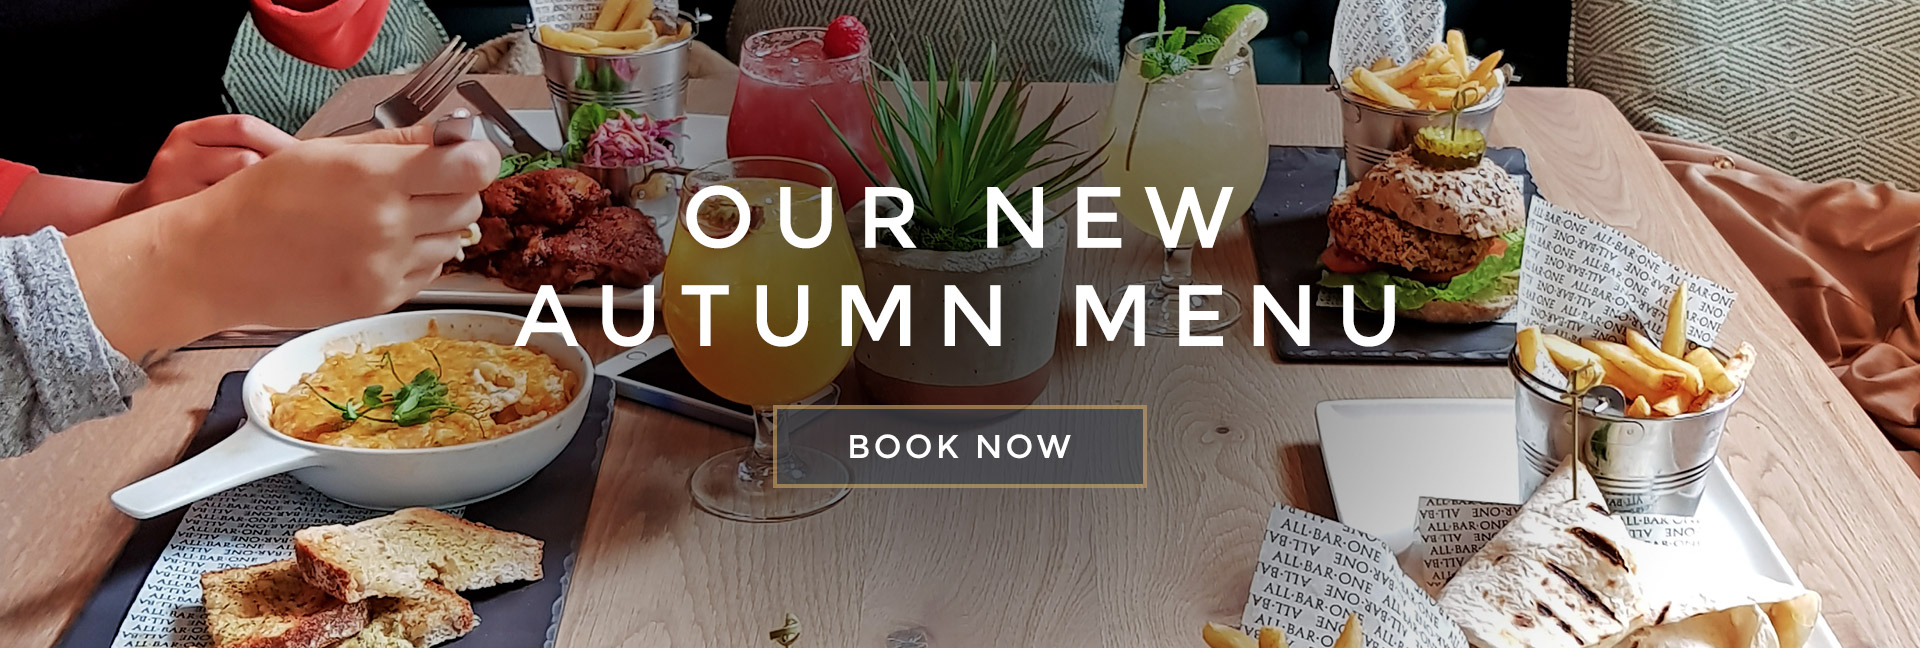 Our new Autumn menu at All Bar One Sutton - Book now